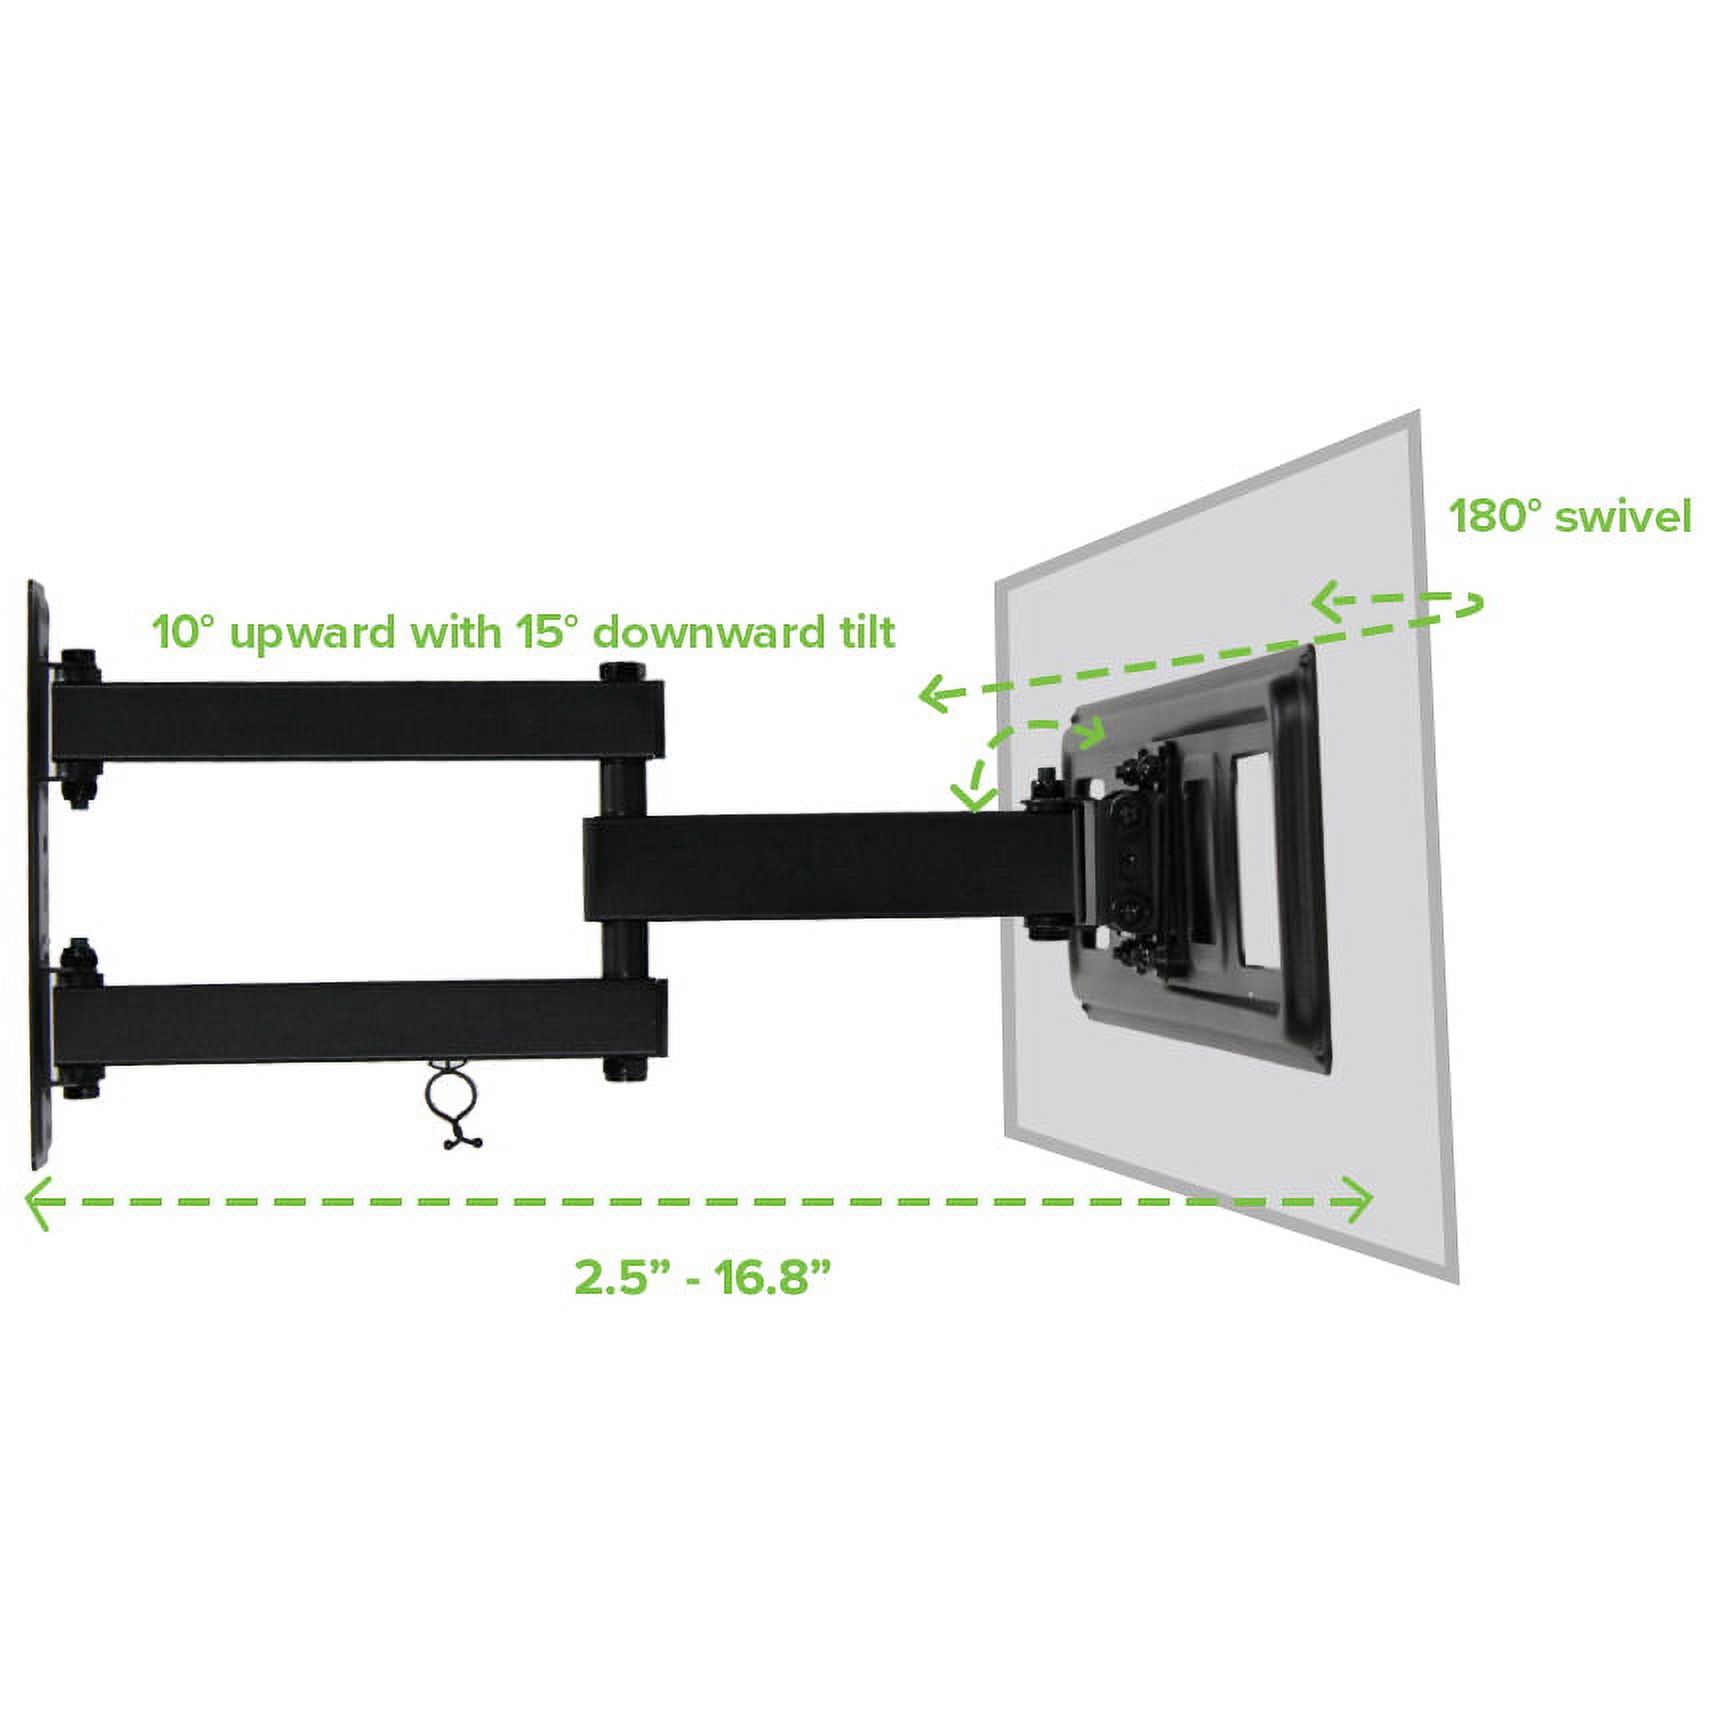 NavePoint Articulating Corner Wall Mount Bracket WithTilt Swivel For LED LCD Plasma Flat Screen TV From 32-55 Inches Black - image 3 of 6